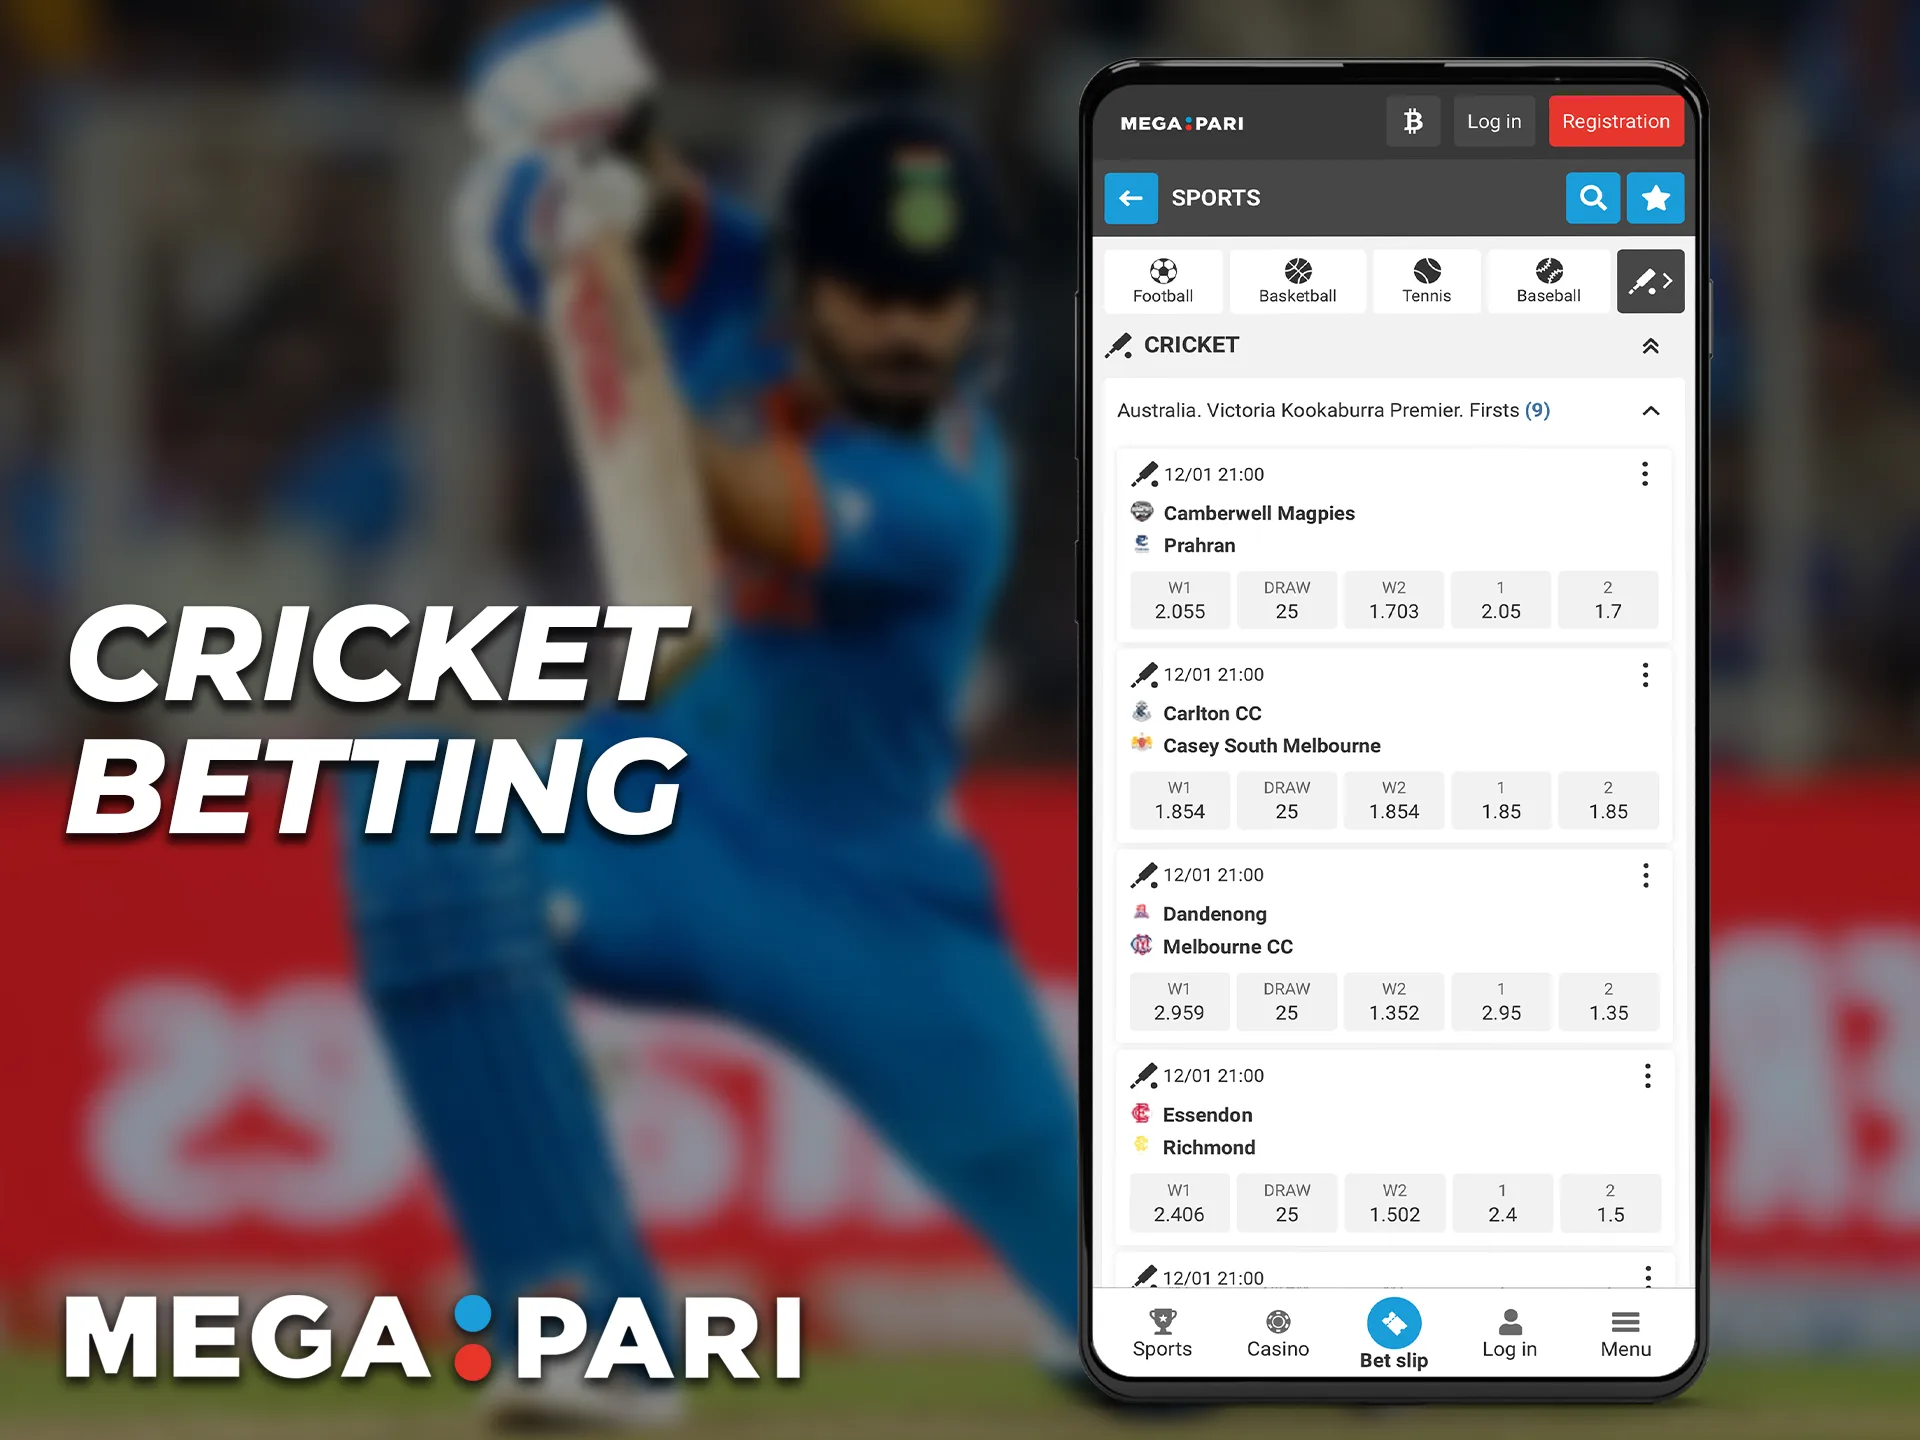 Place bets on the Megapari mobile app on India's most popular sport Cricket.